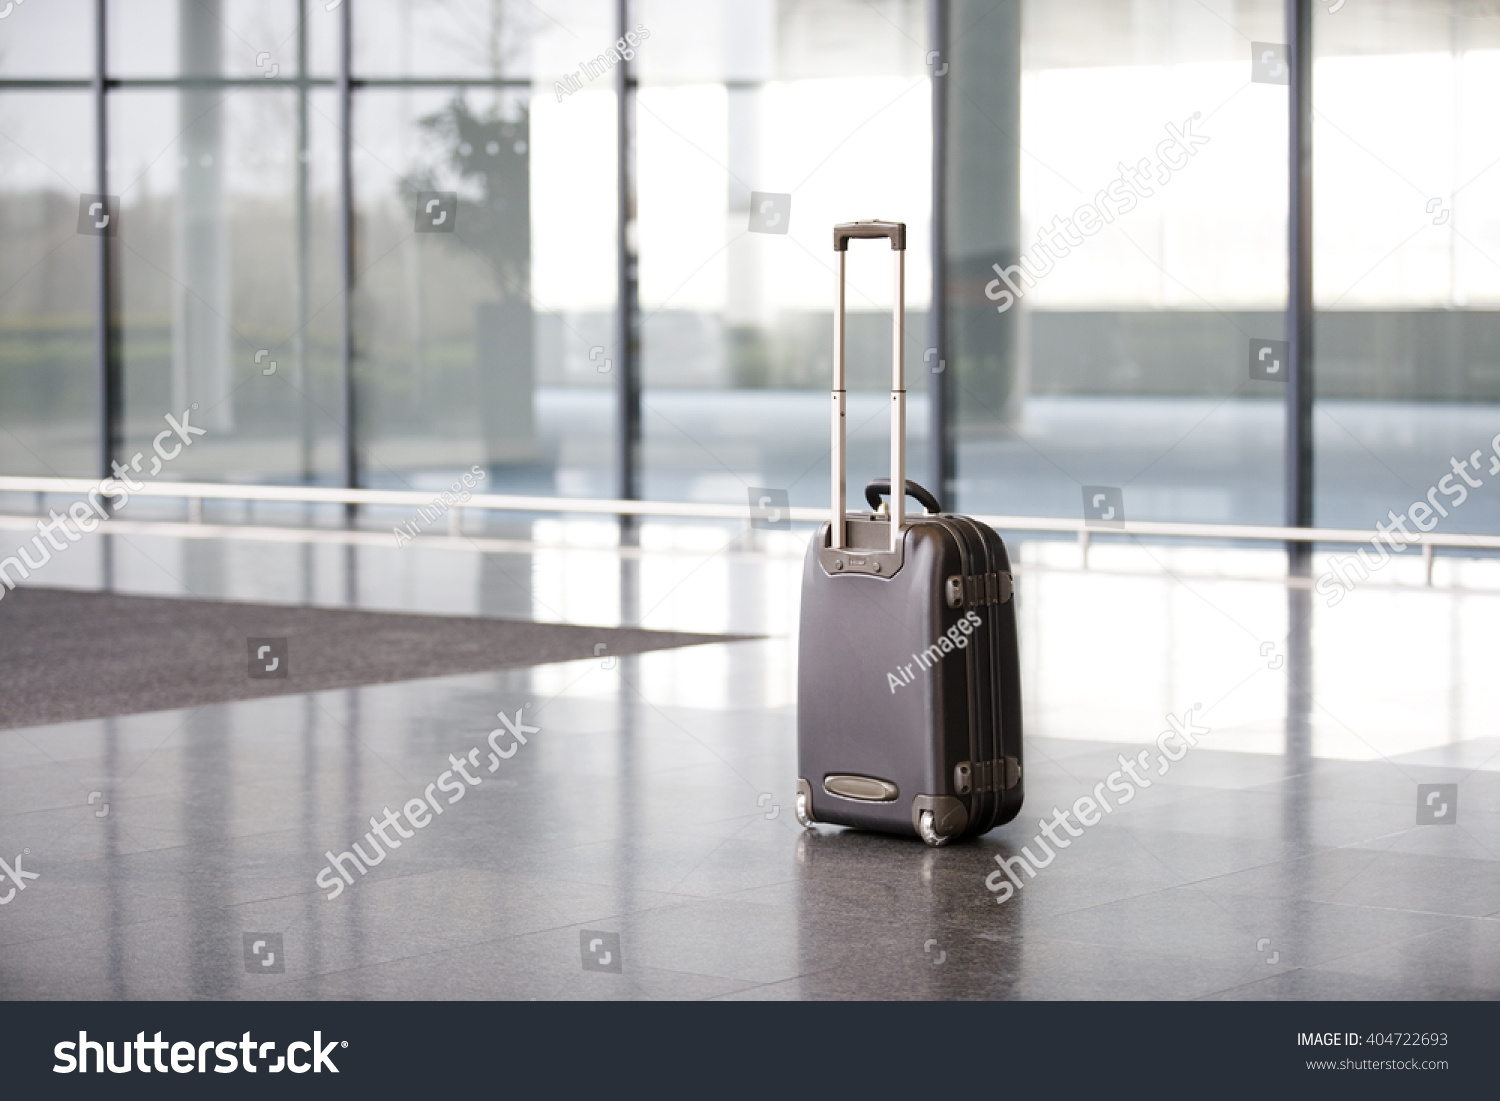 An unattended suitcase in office lobby #404722693